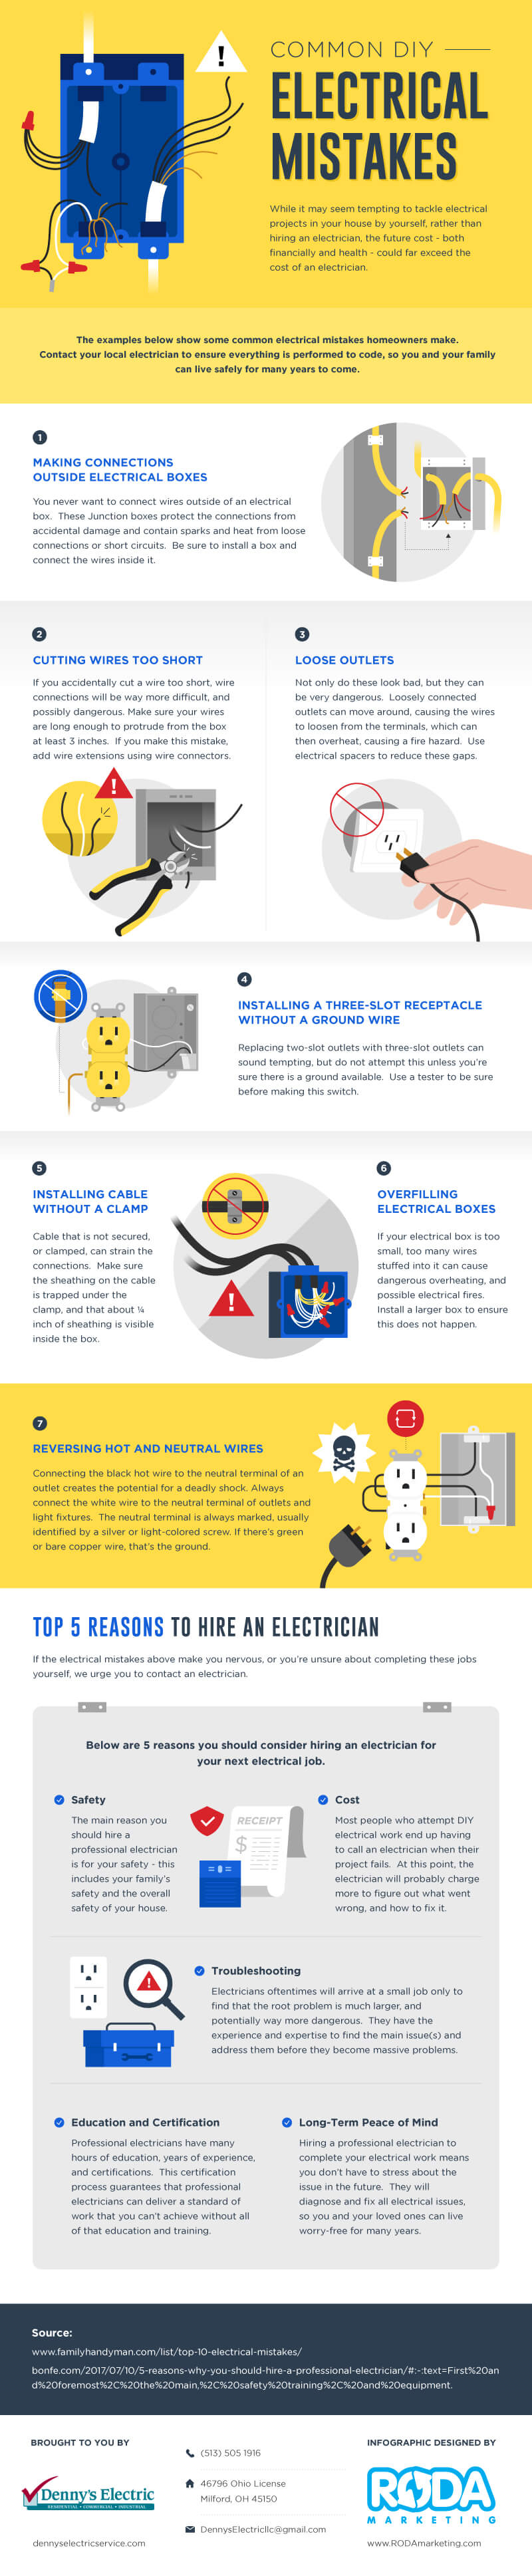 Common DIY Electrical Mistakes [Infographic]